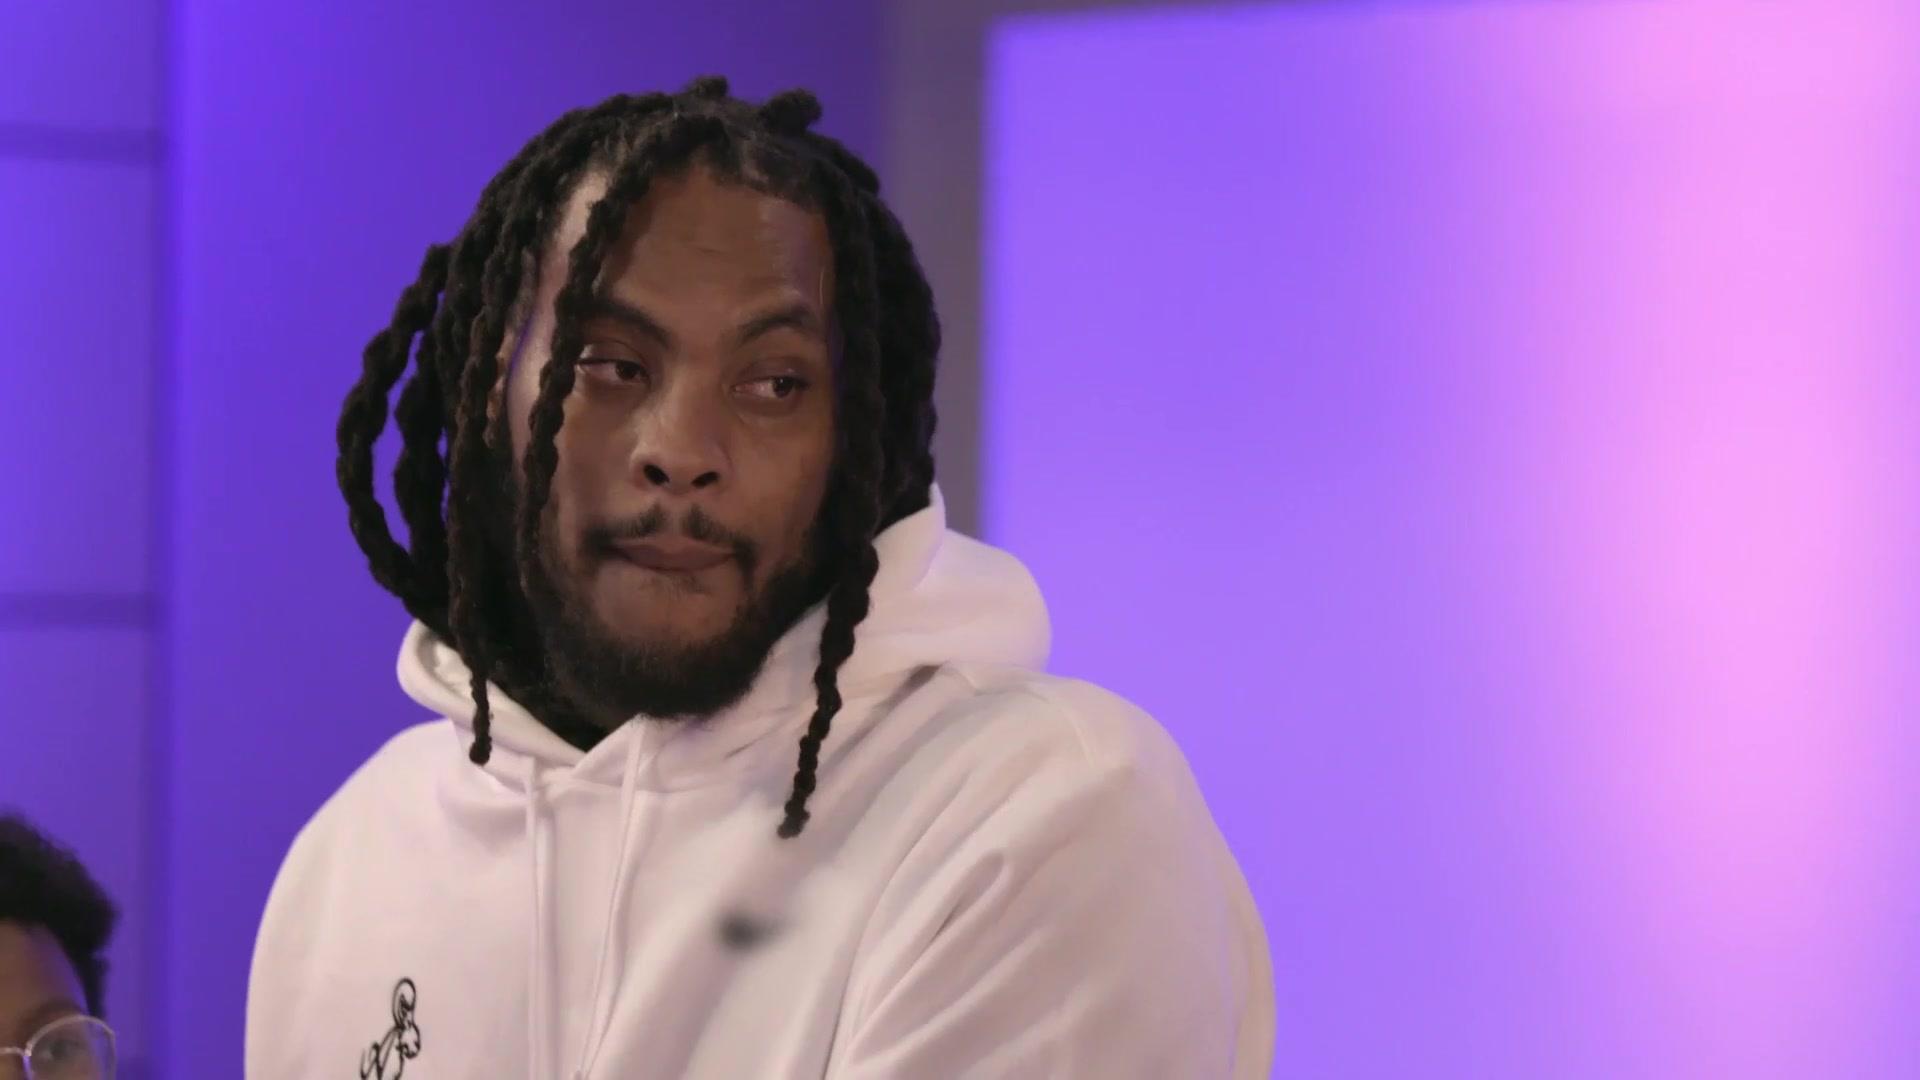 Sneak Peek: Is Waka Ready to Step Up For Charlie?